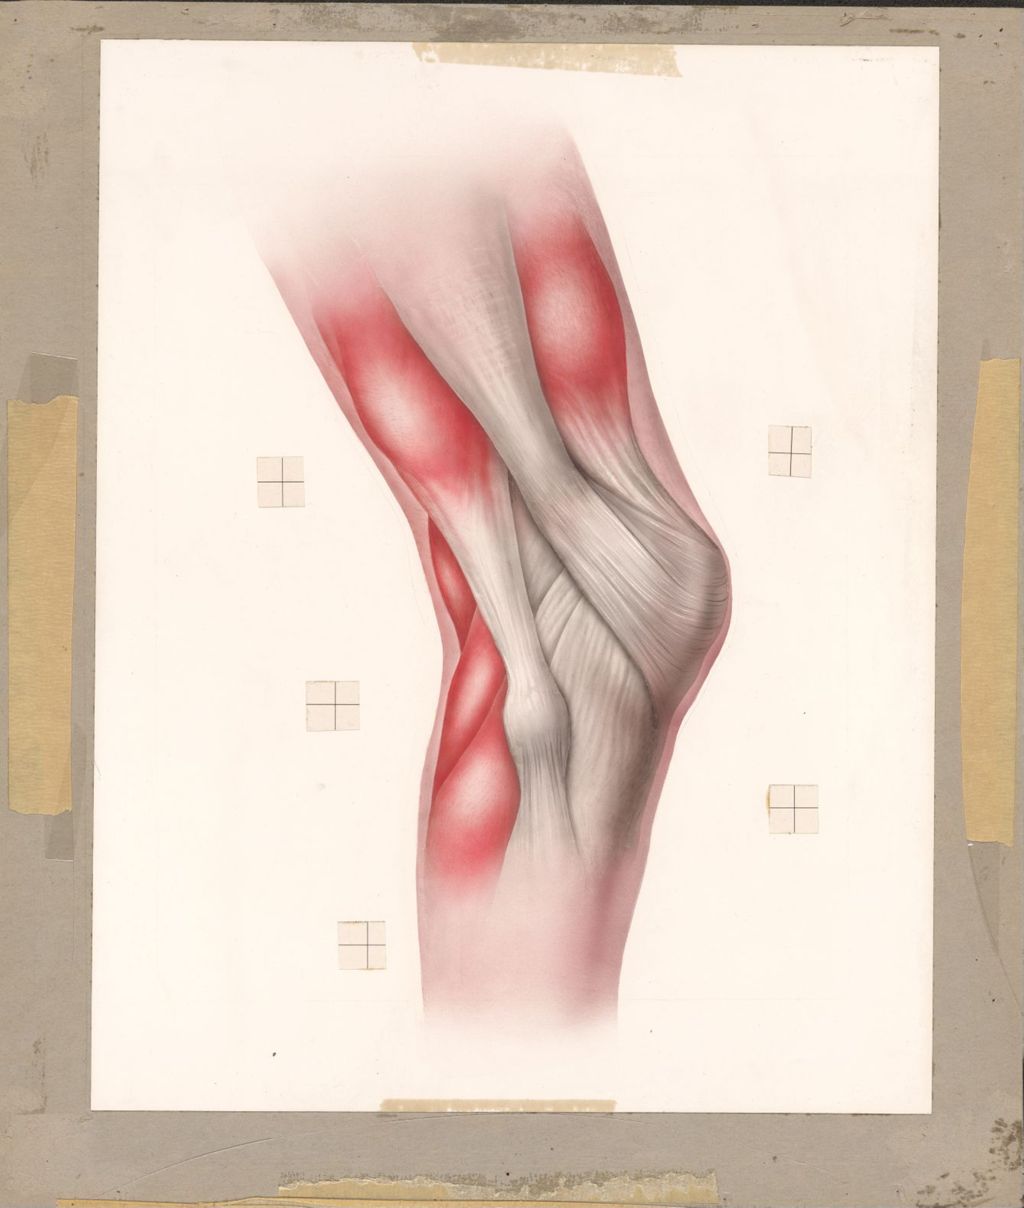 Miniature of Muscle Spasm Around Knee-Joint